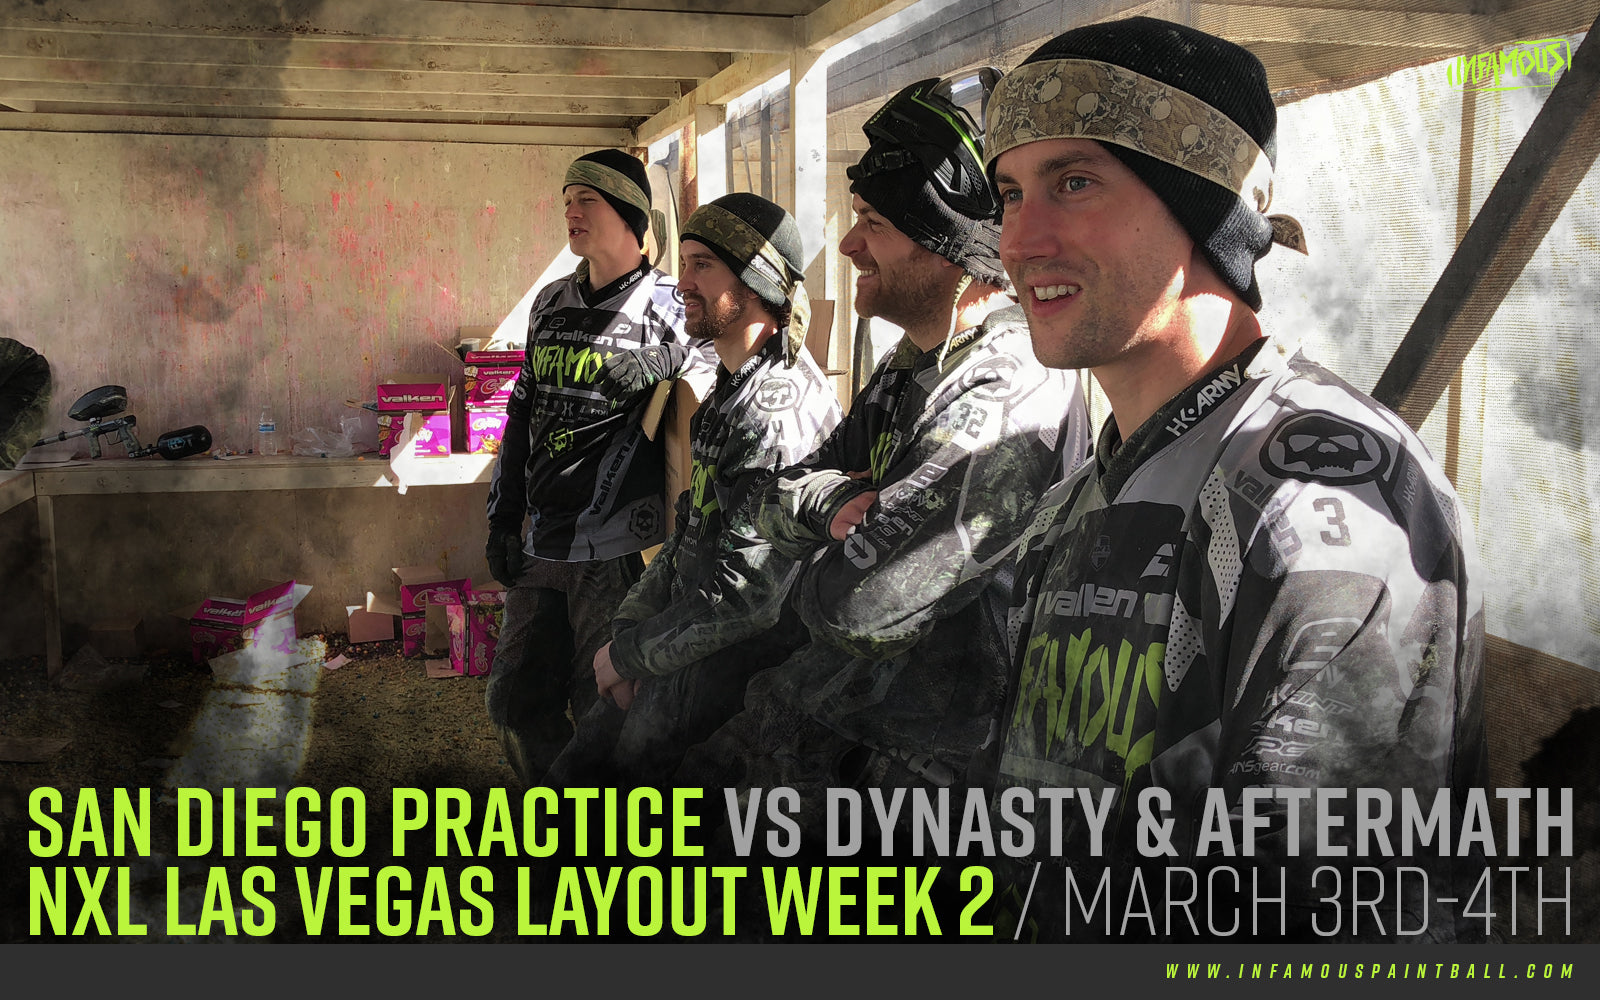 Practice VS Dynasty & Aftermath / March 3rd-4th NXL Las Vegas